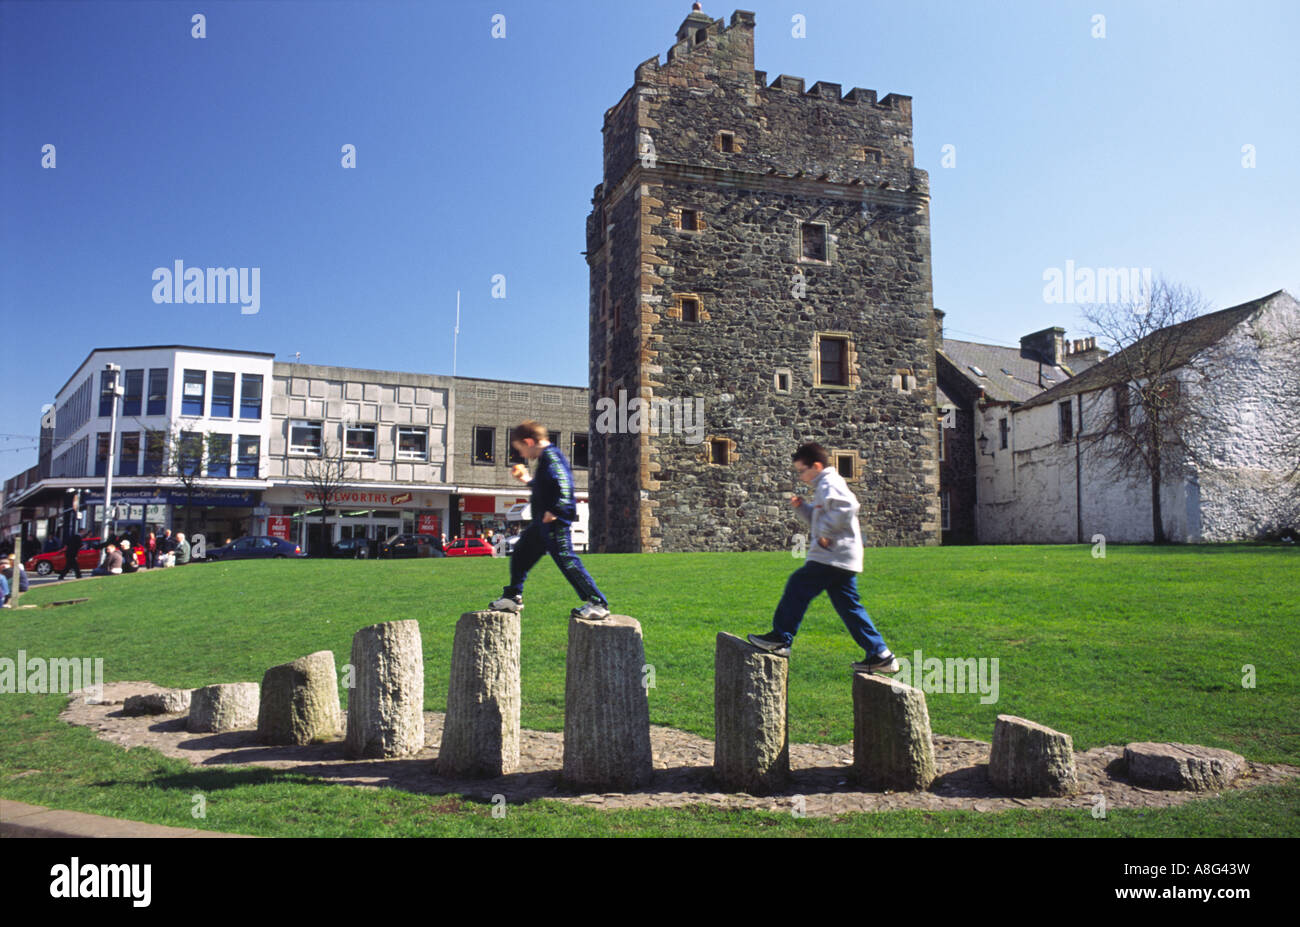 Kids playing on art work in front of the Castle of St John in Stranraer town centre Galloway Scotland UK Stock Photo